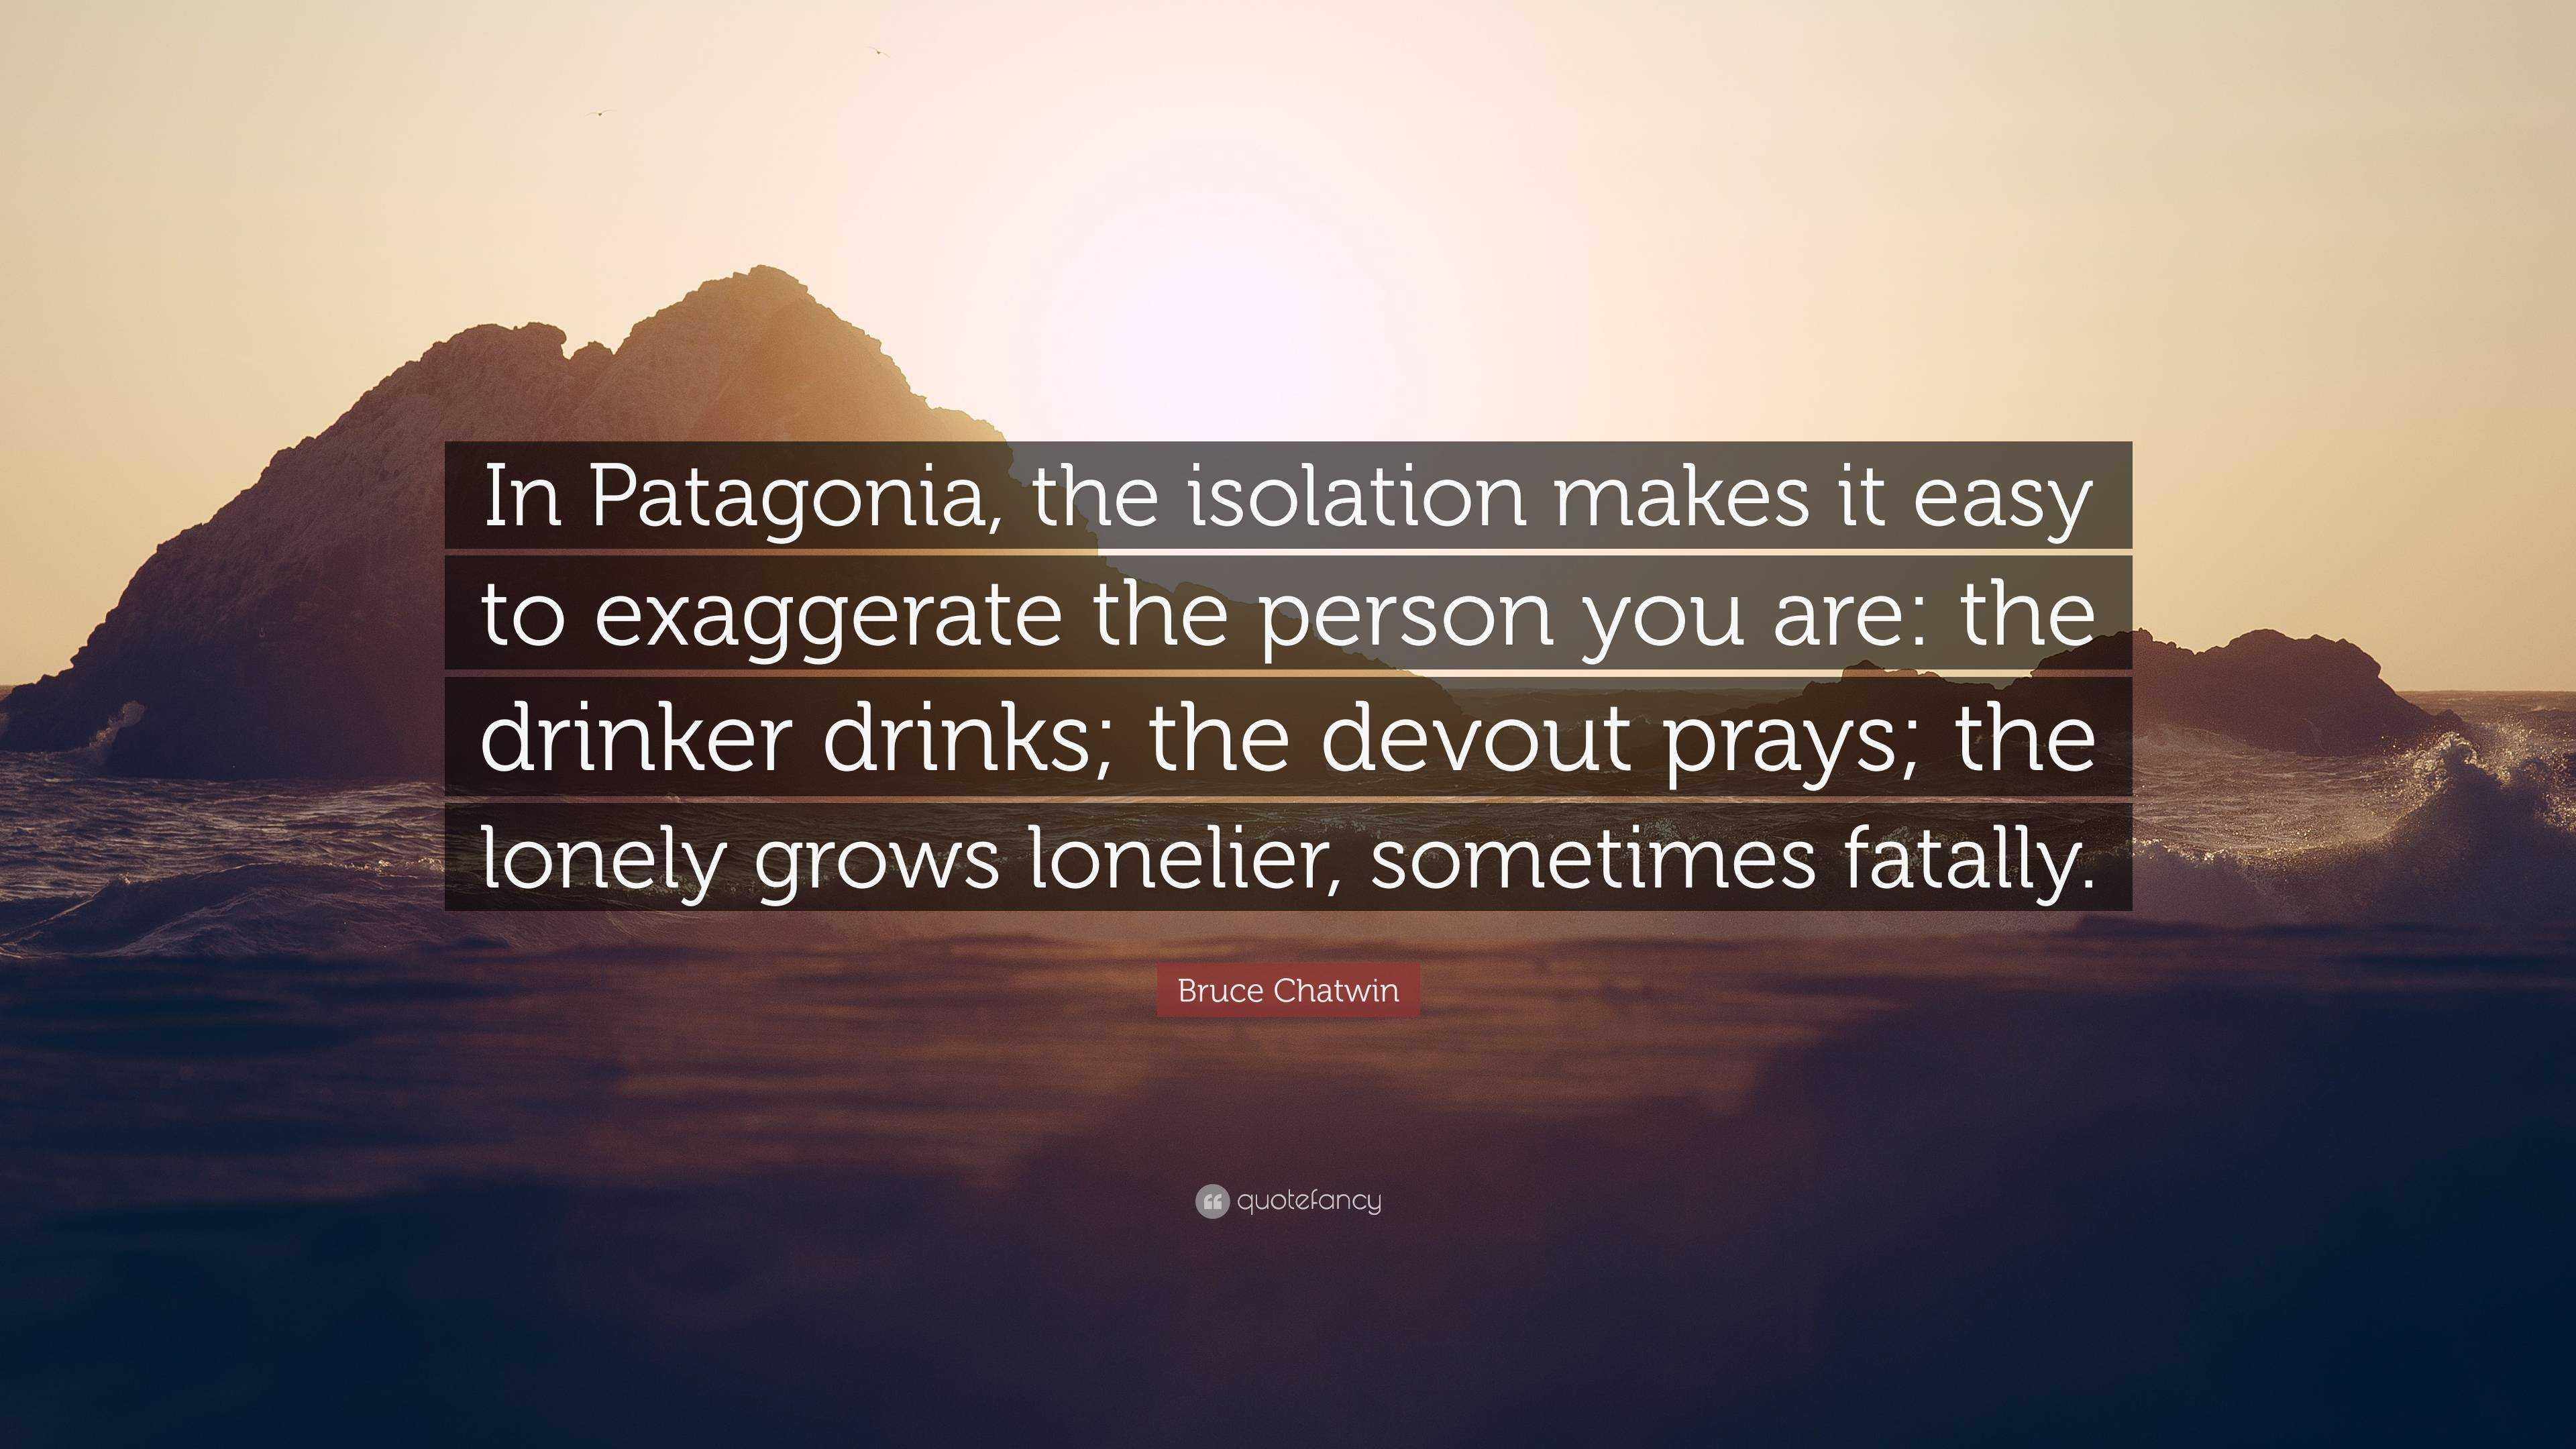 Fundament Lige korrekt Bruce Chatwin Quote: “In Patagonia, the isolation makes it easy to  exaggerate the person you are: the drinker drinks; the devout prays; the  lo...”